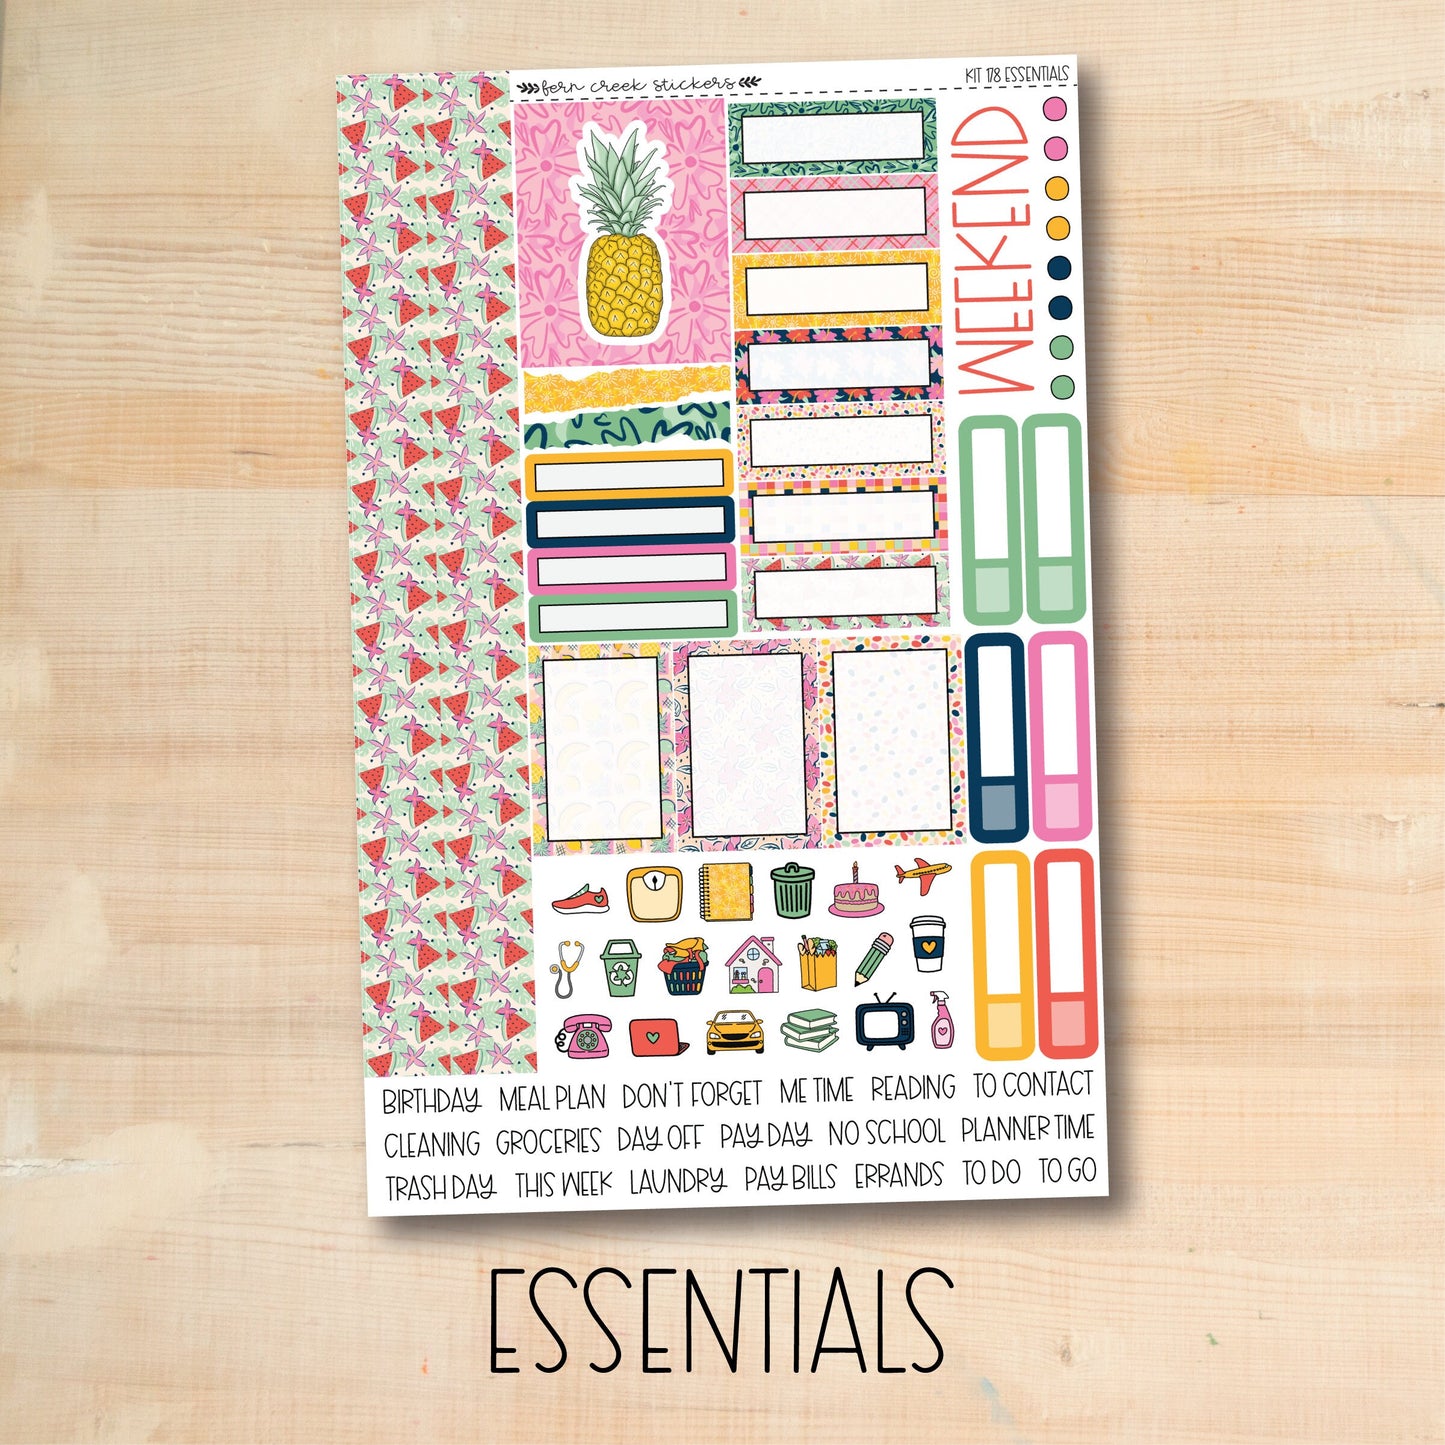 KIT-178 || BEACHY weekly planner kit for Erin Condren, Plum Paper, MakseLife and more!